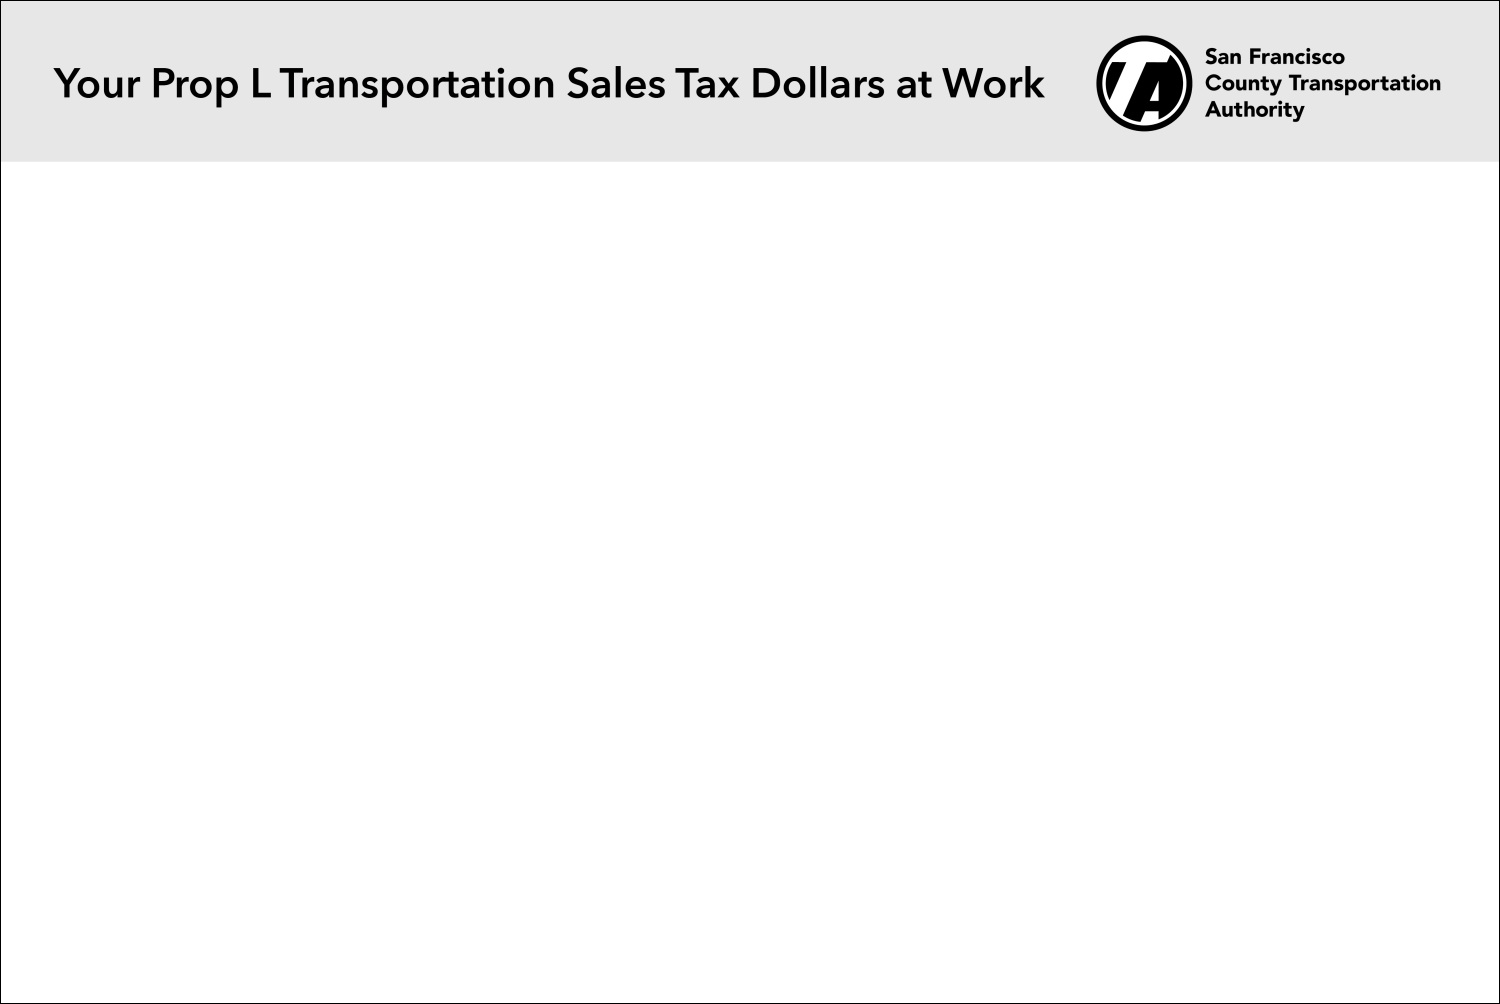 A construction sign with "Your Prop L Transportation Sales Tax Dollars at Work" and the SFCTA logo at the top